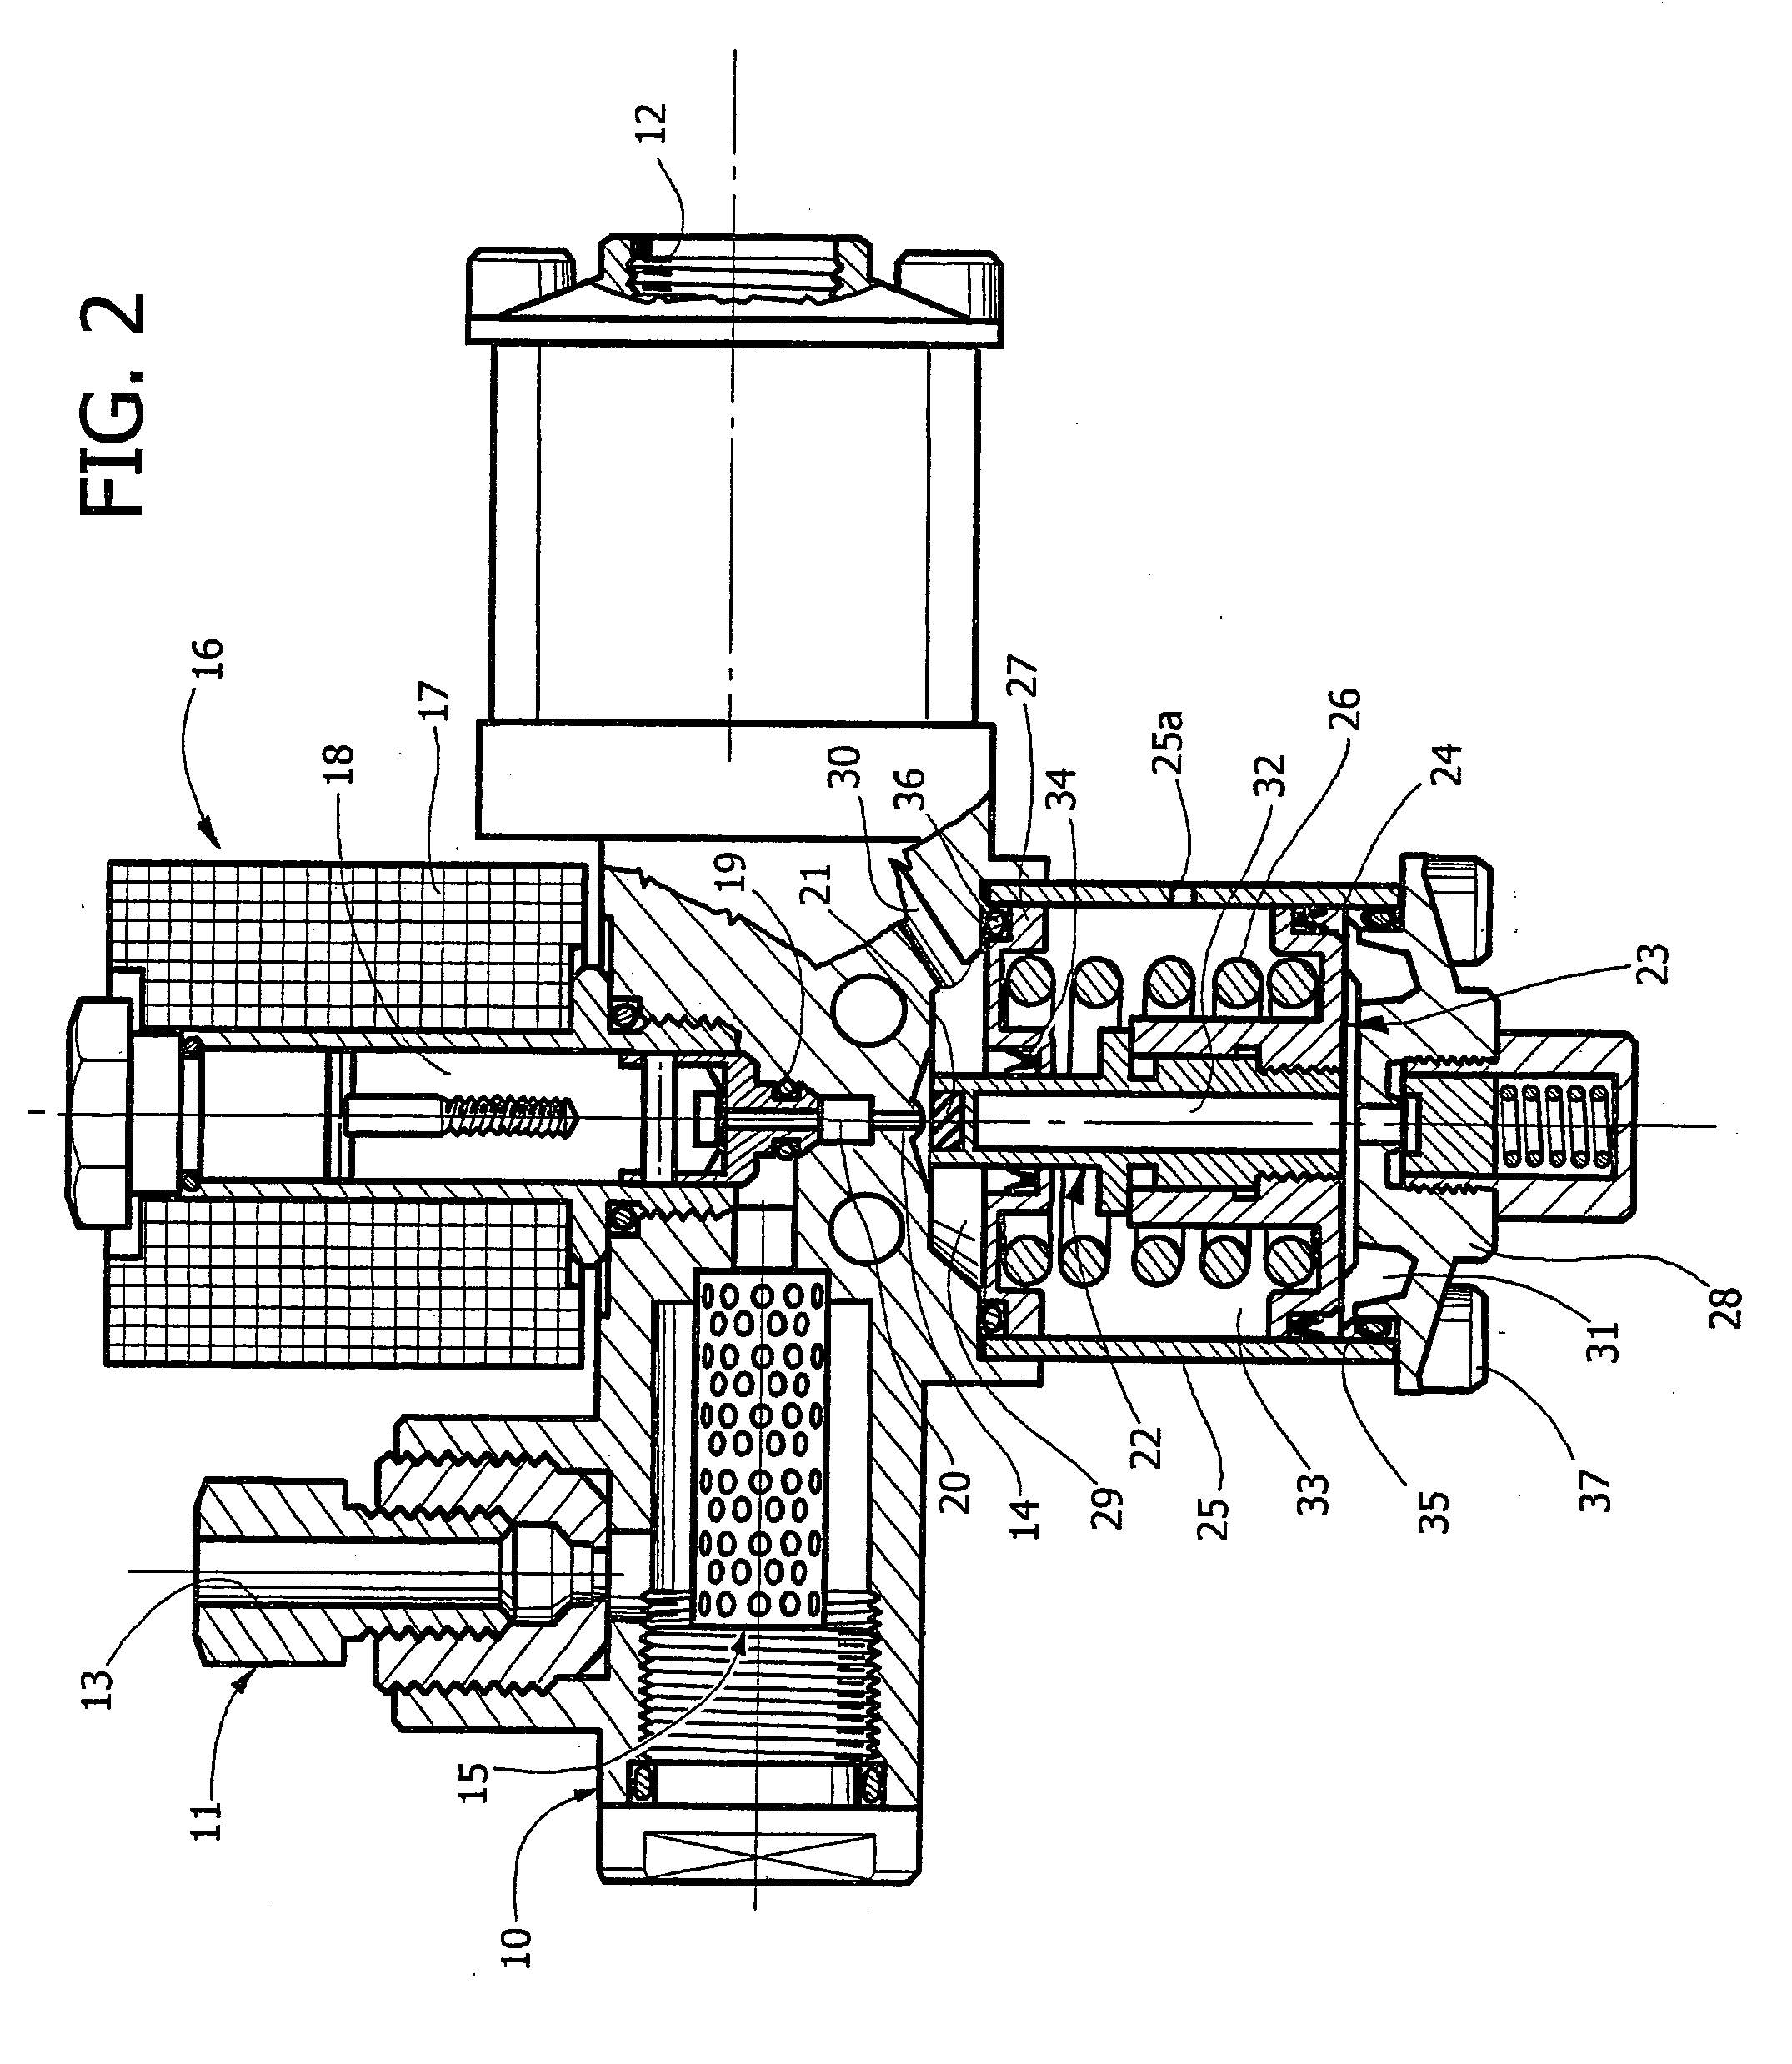 Gas feeding system for an internal combustion engine, having an improved pressure reducing valve